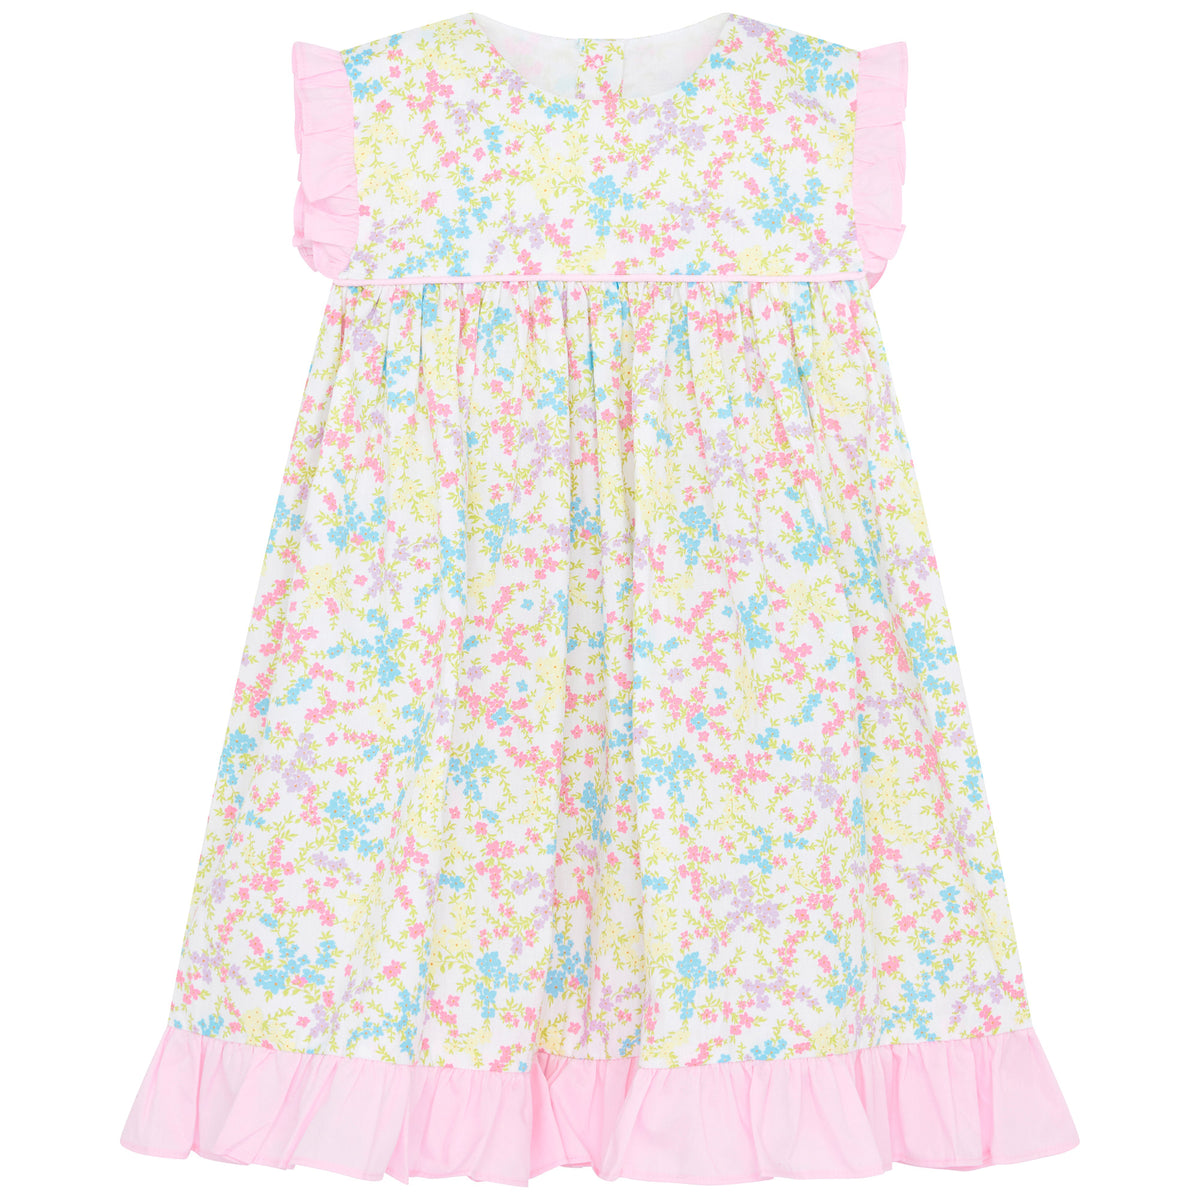 Little Princess Beatrice Tiny Floral Cotton Baby Dress Pink White | Holly Hastie London